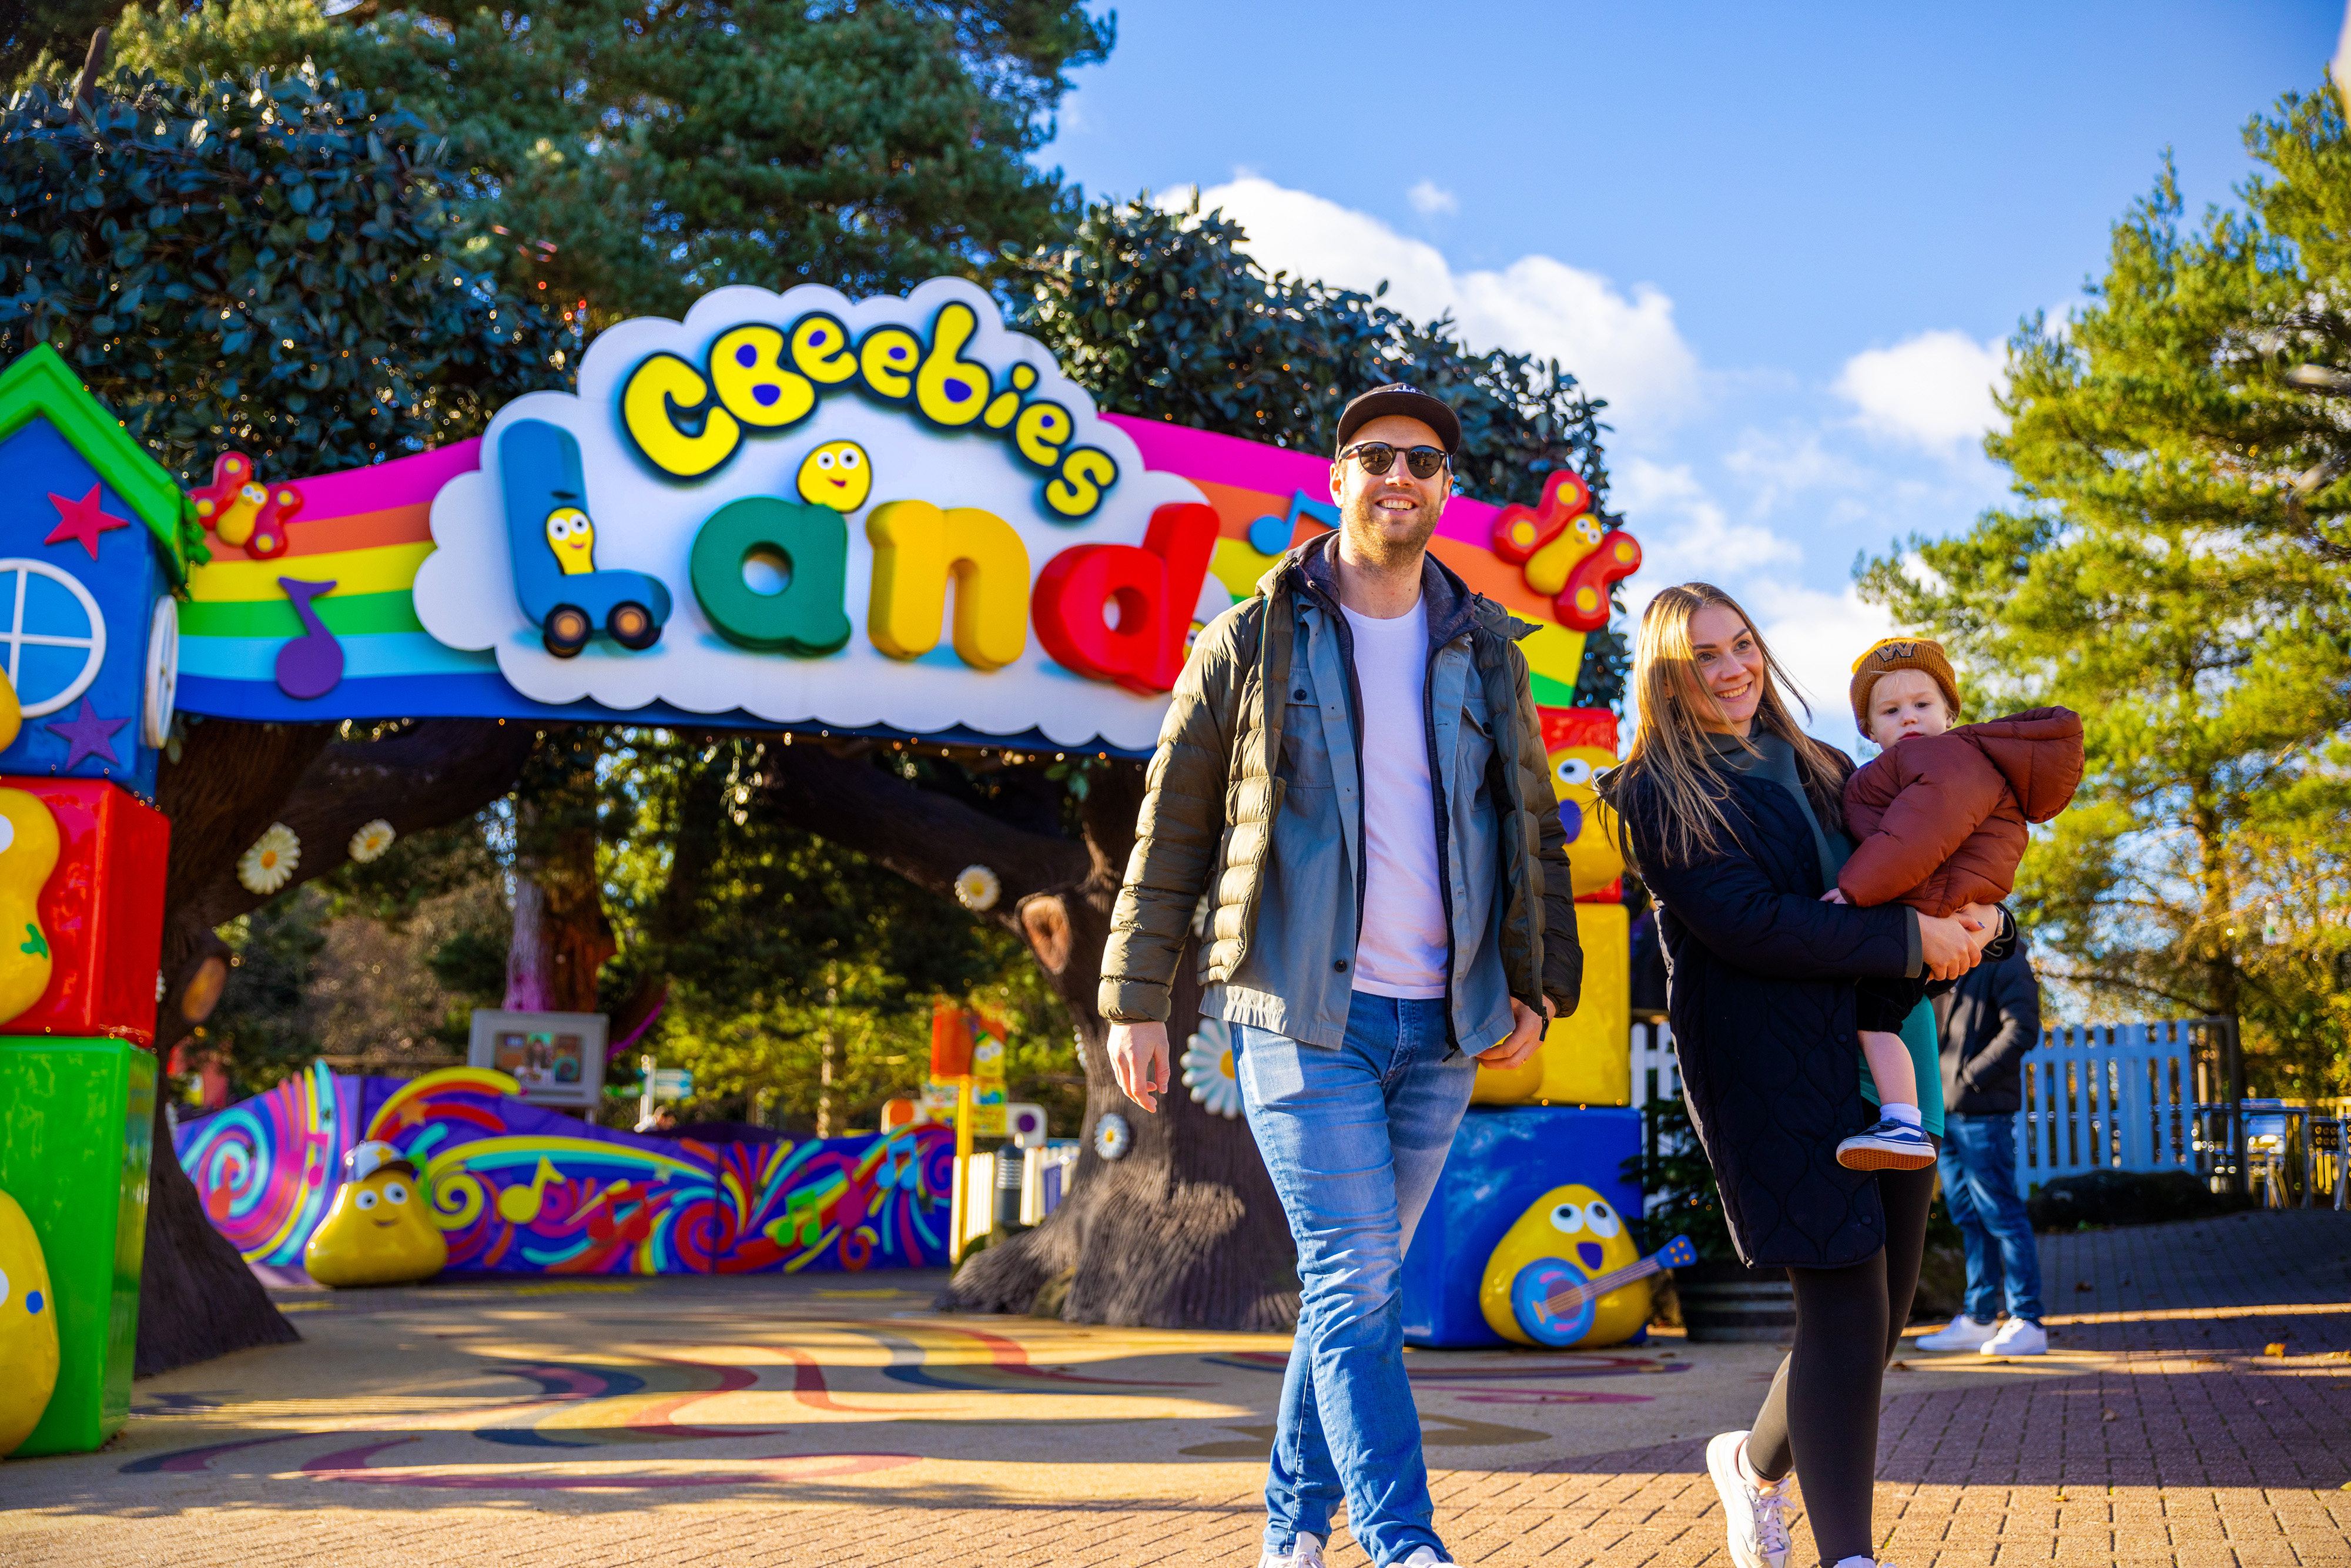 New rules are being introduced for kids at Alton Towers this year